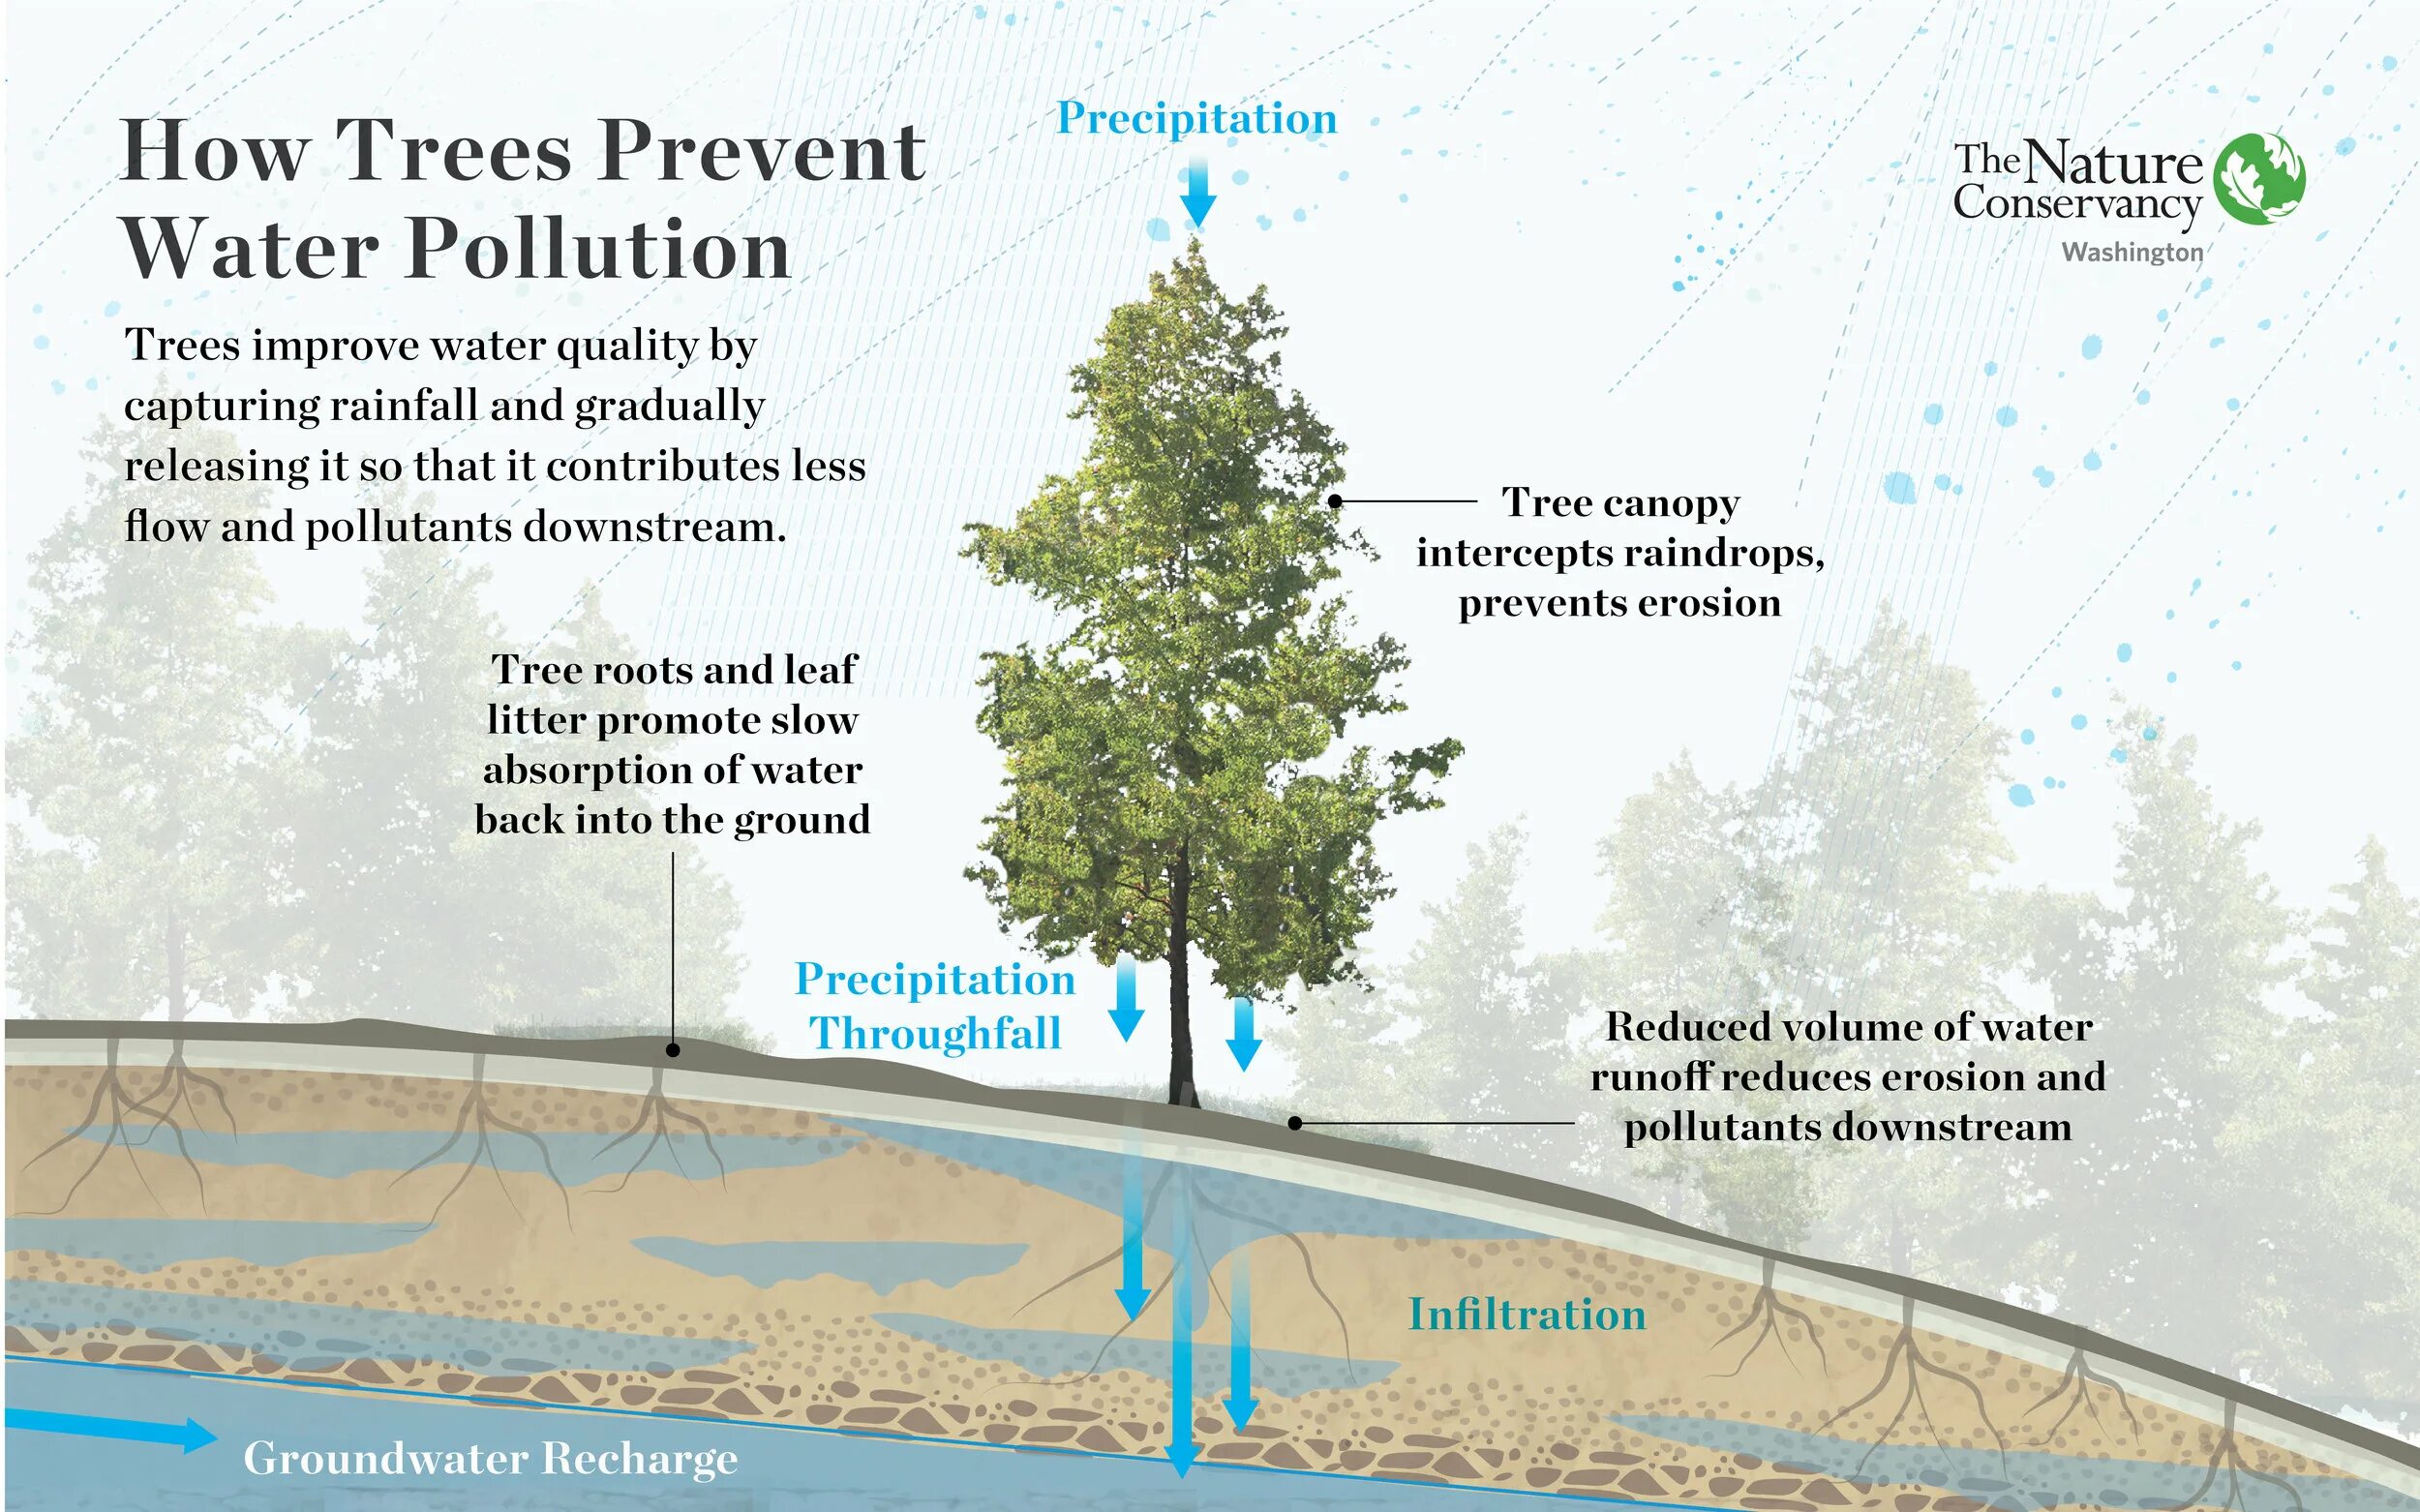 Fill in avalanche tornado pollution endangered. How to prevent Water pollution. Water pollution solutions. Prevent Water pollution. Water pollution Prevention.